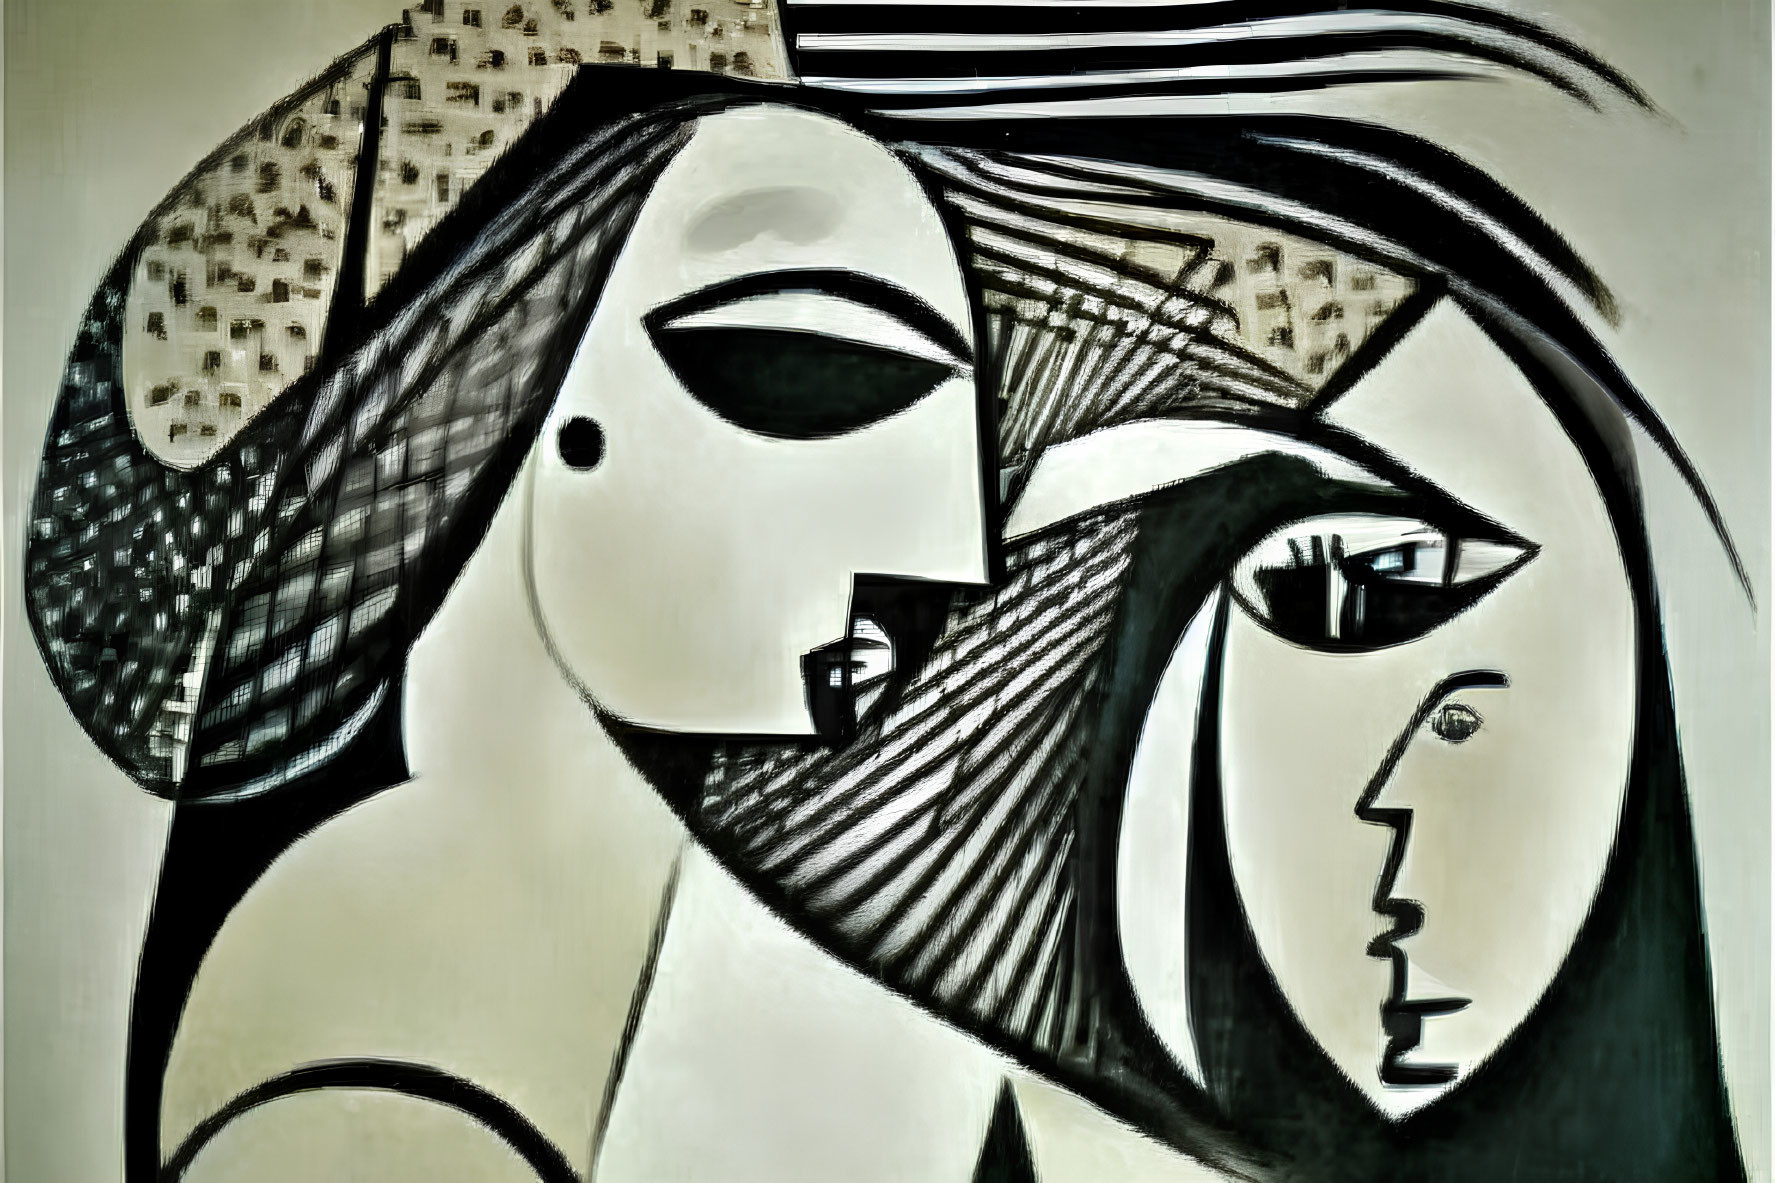 Monochrome Cubist faces with prominent eyes and noses